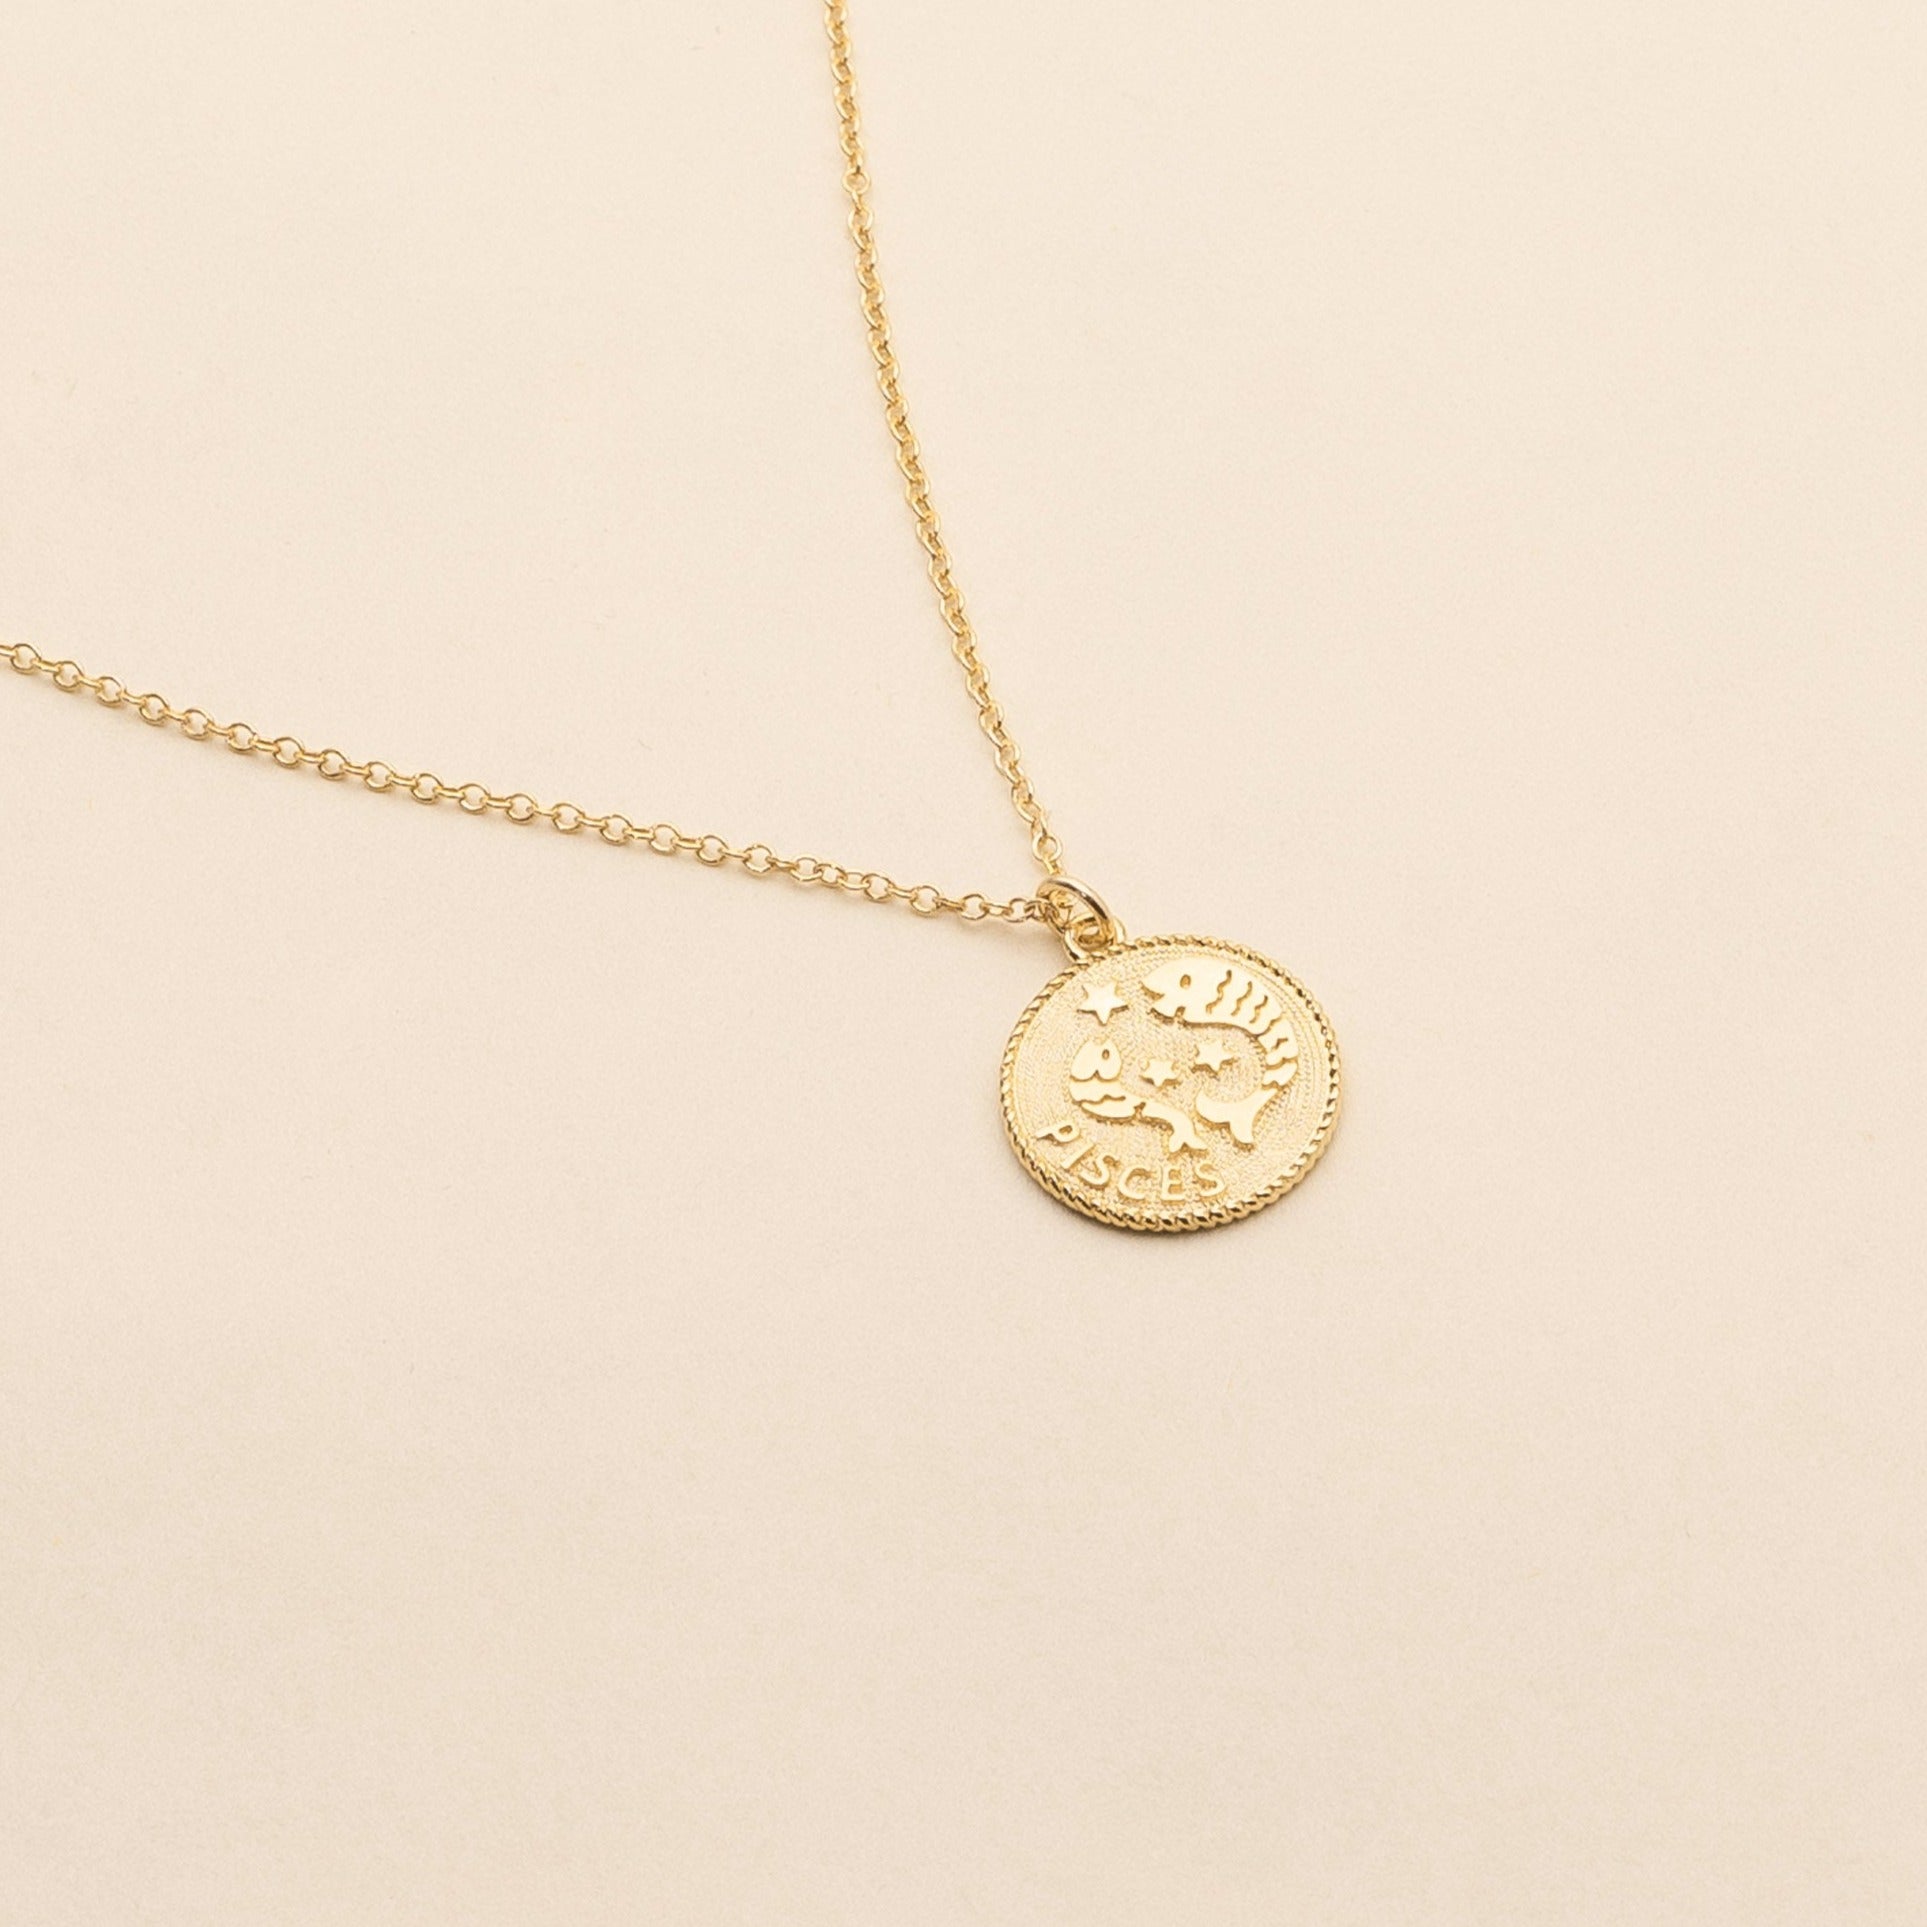 Dainty gold Pisces Zodiac Necklace_Feb 20-Mar 20_Katie Dean Jewelry_horoscope sign_Zodiac Collection, dainty handmade necklaces by Katie Dean Jewelry